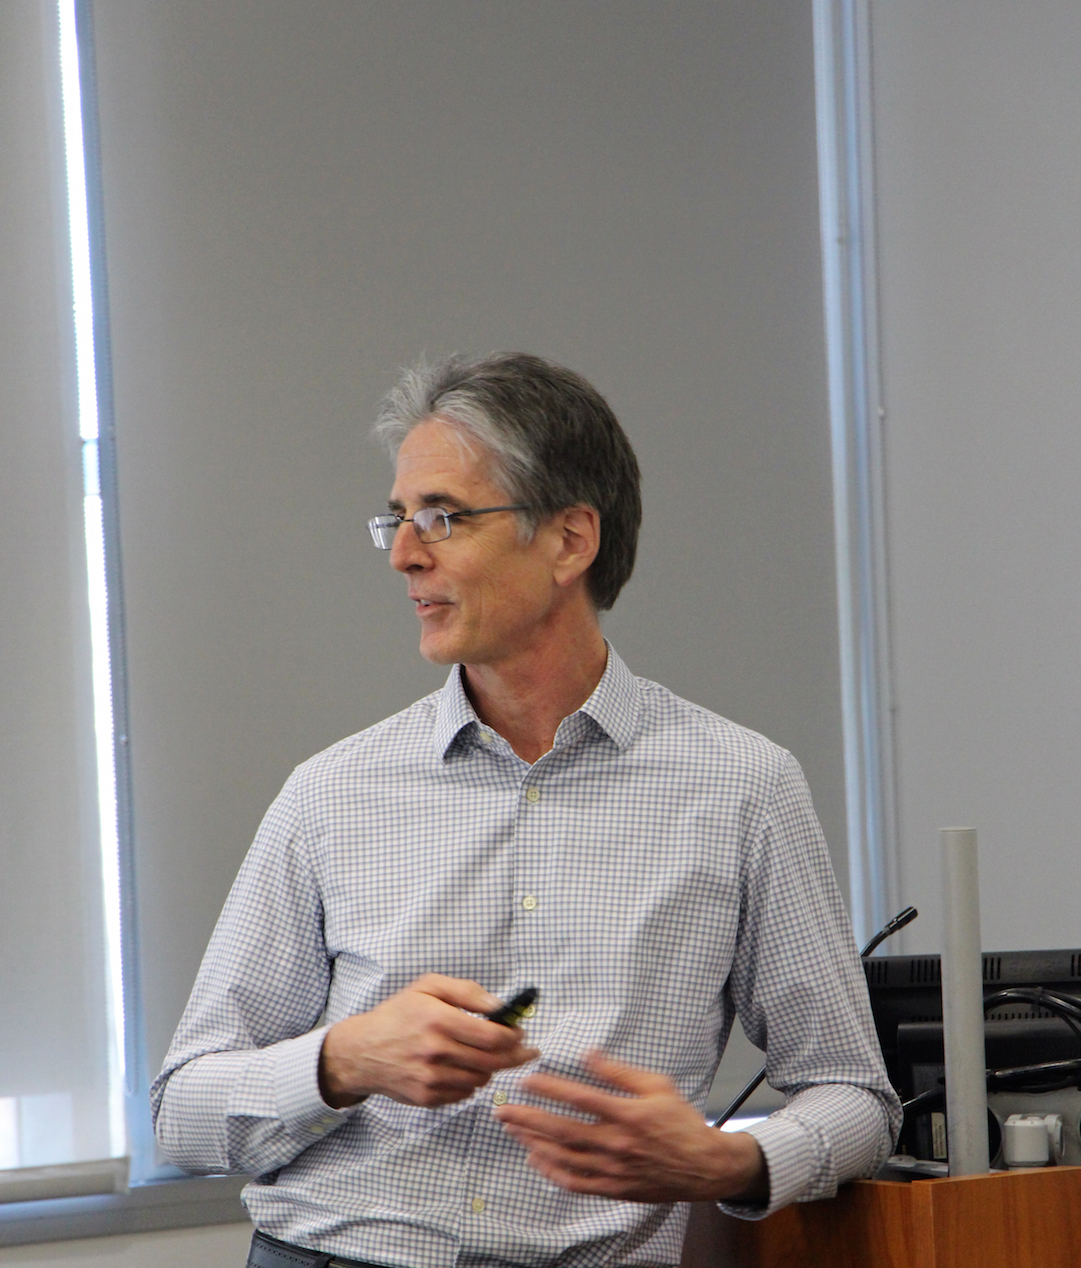 David Pine, Professor and Department Chair of Chemical and Biomolecular Engineering